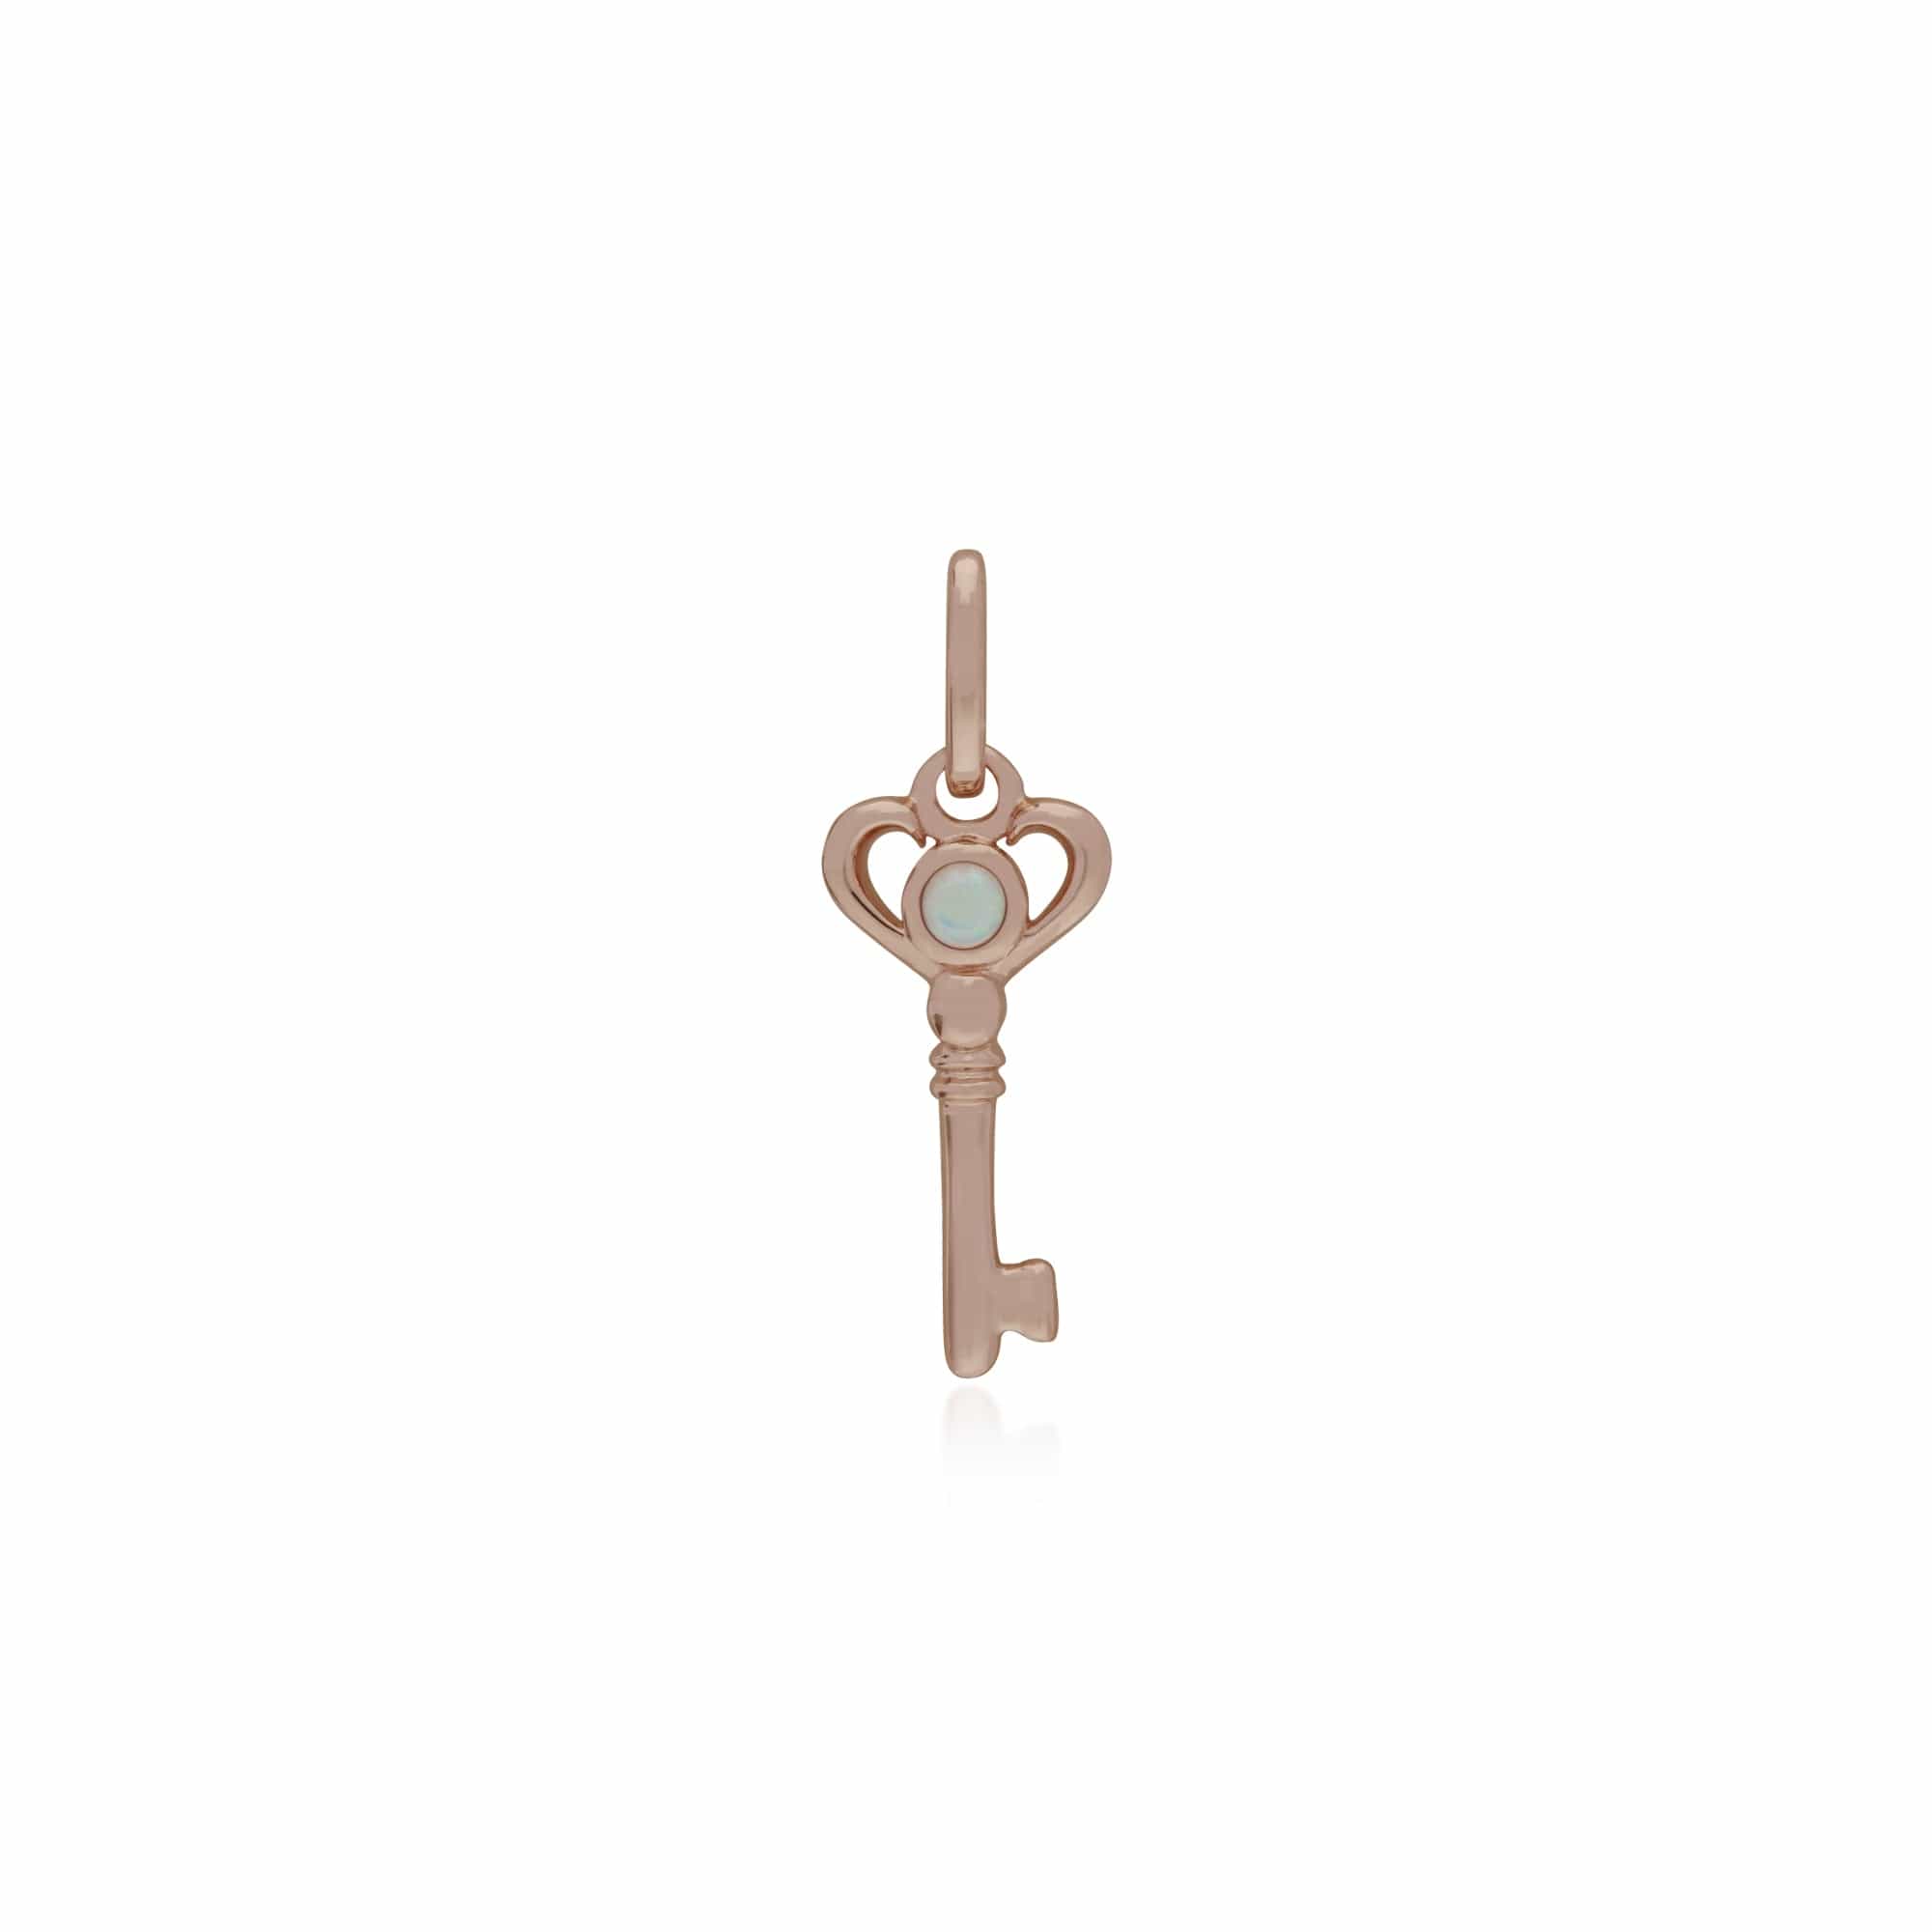 270P028602925-270P026501925 Classic Swirl Heart Lock Pendant & Opal Key Charm in Rose Gold Plated 925 Sterling Silver 2